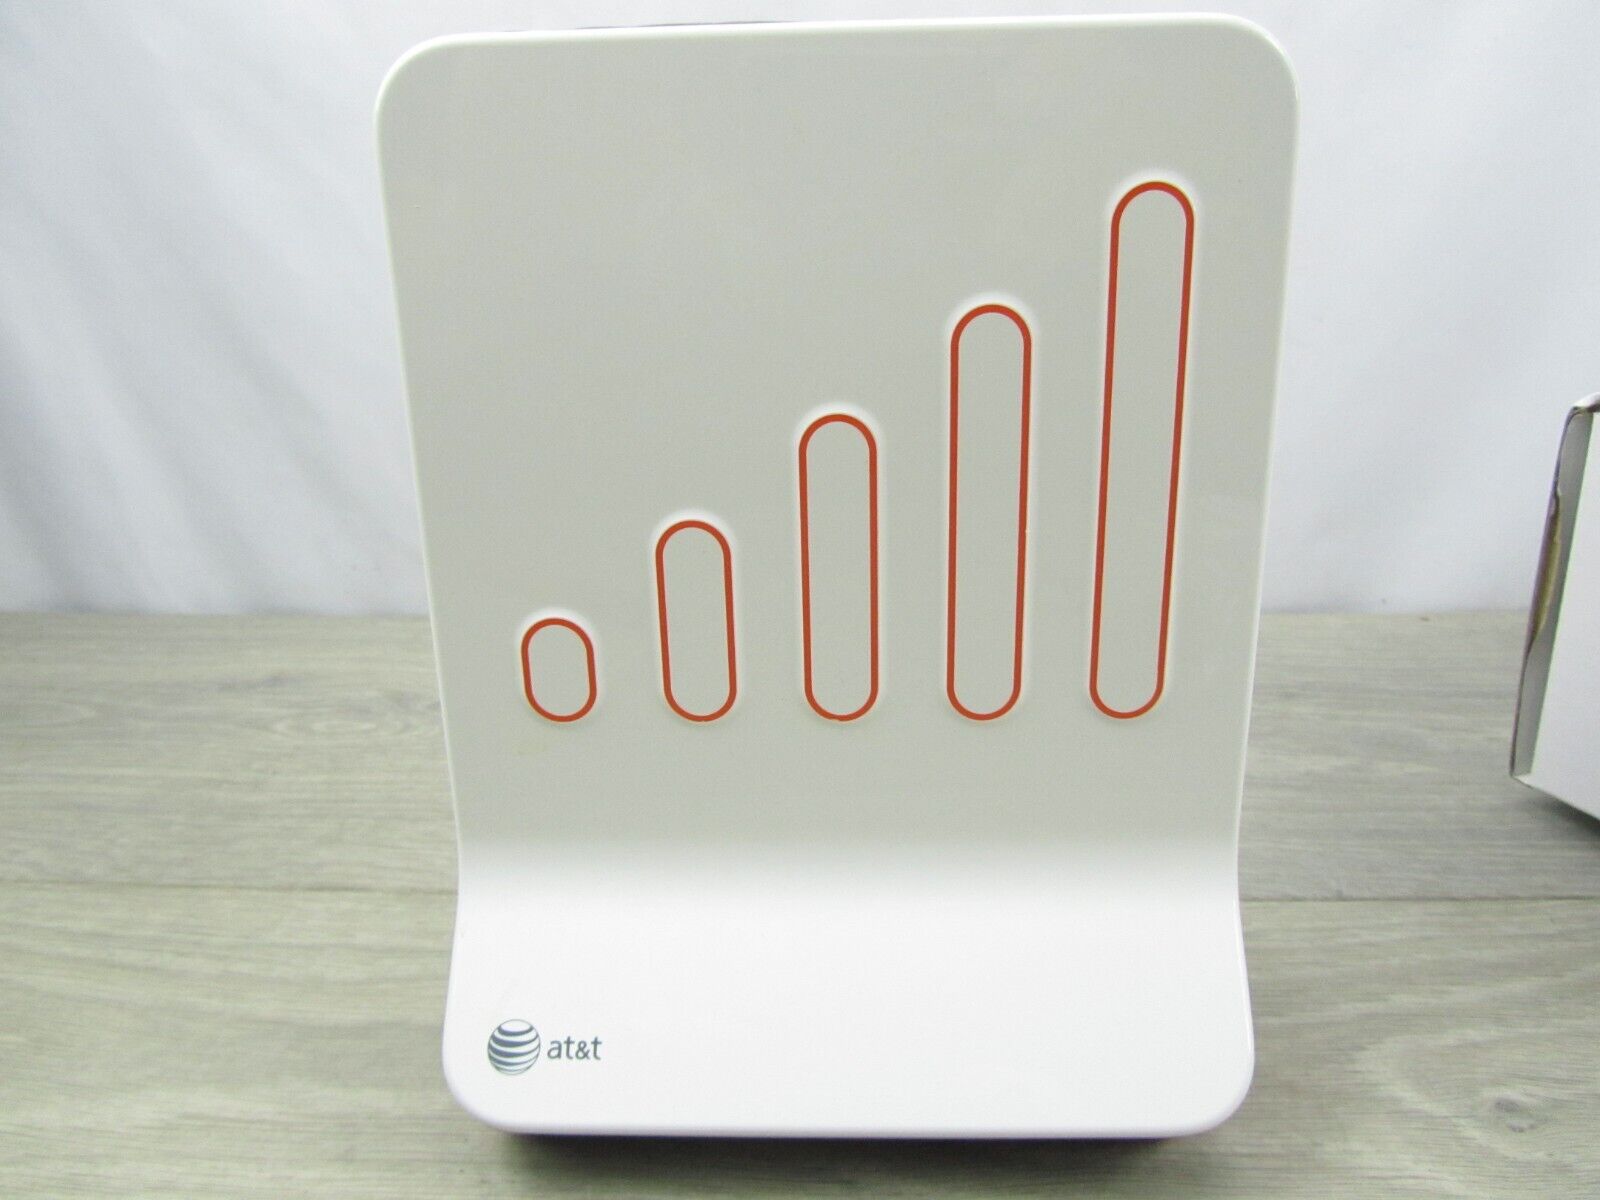 att-readies-in-home-3g-microcell